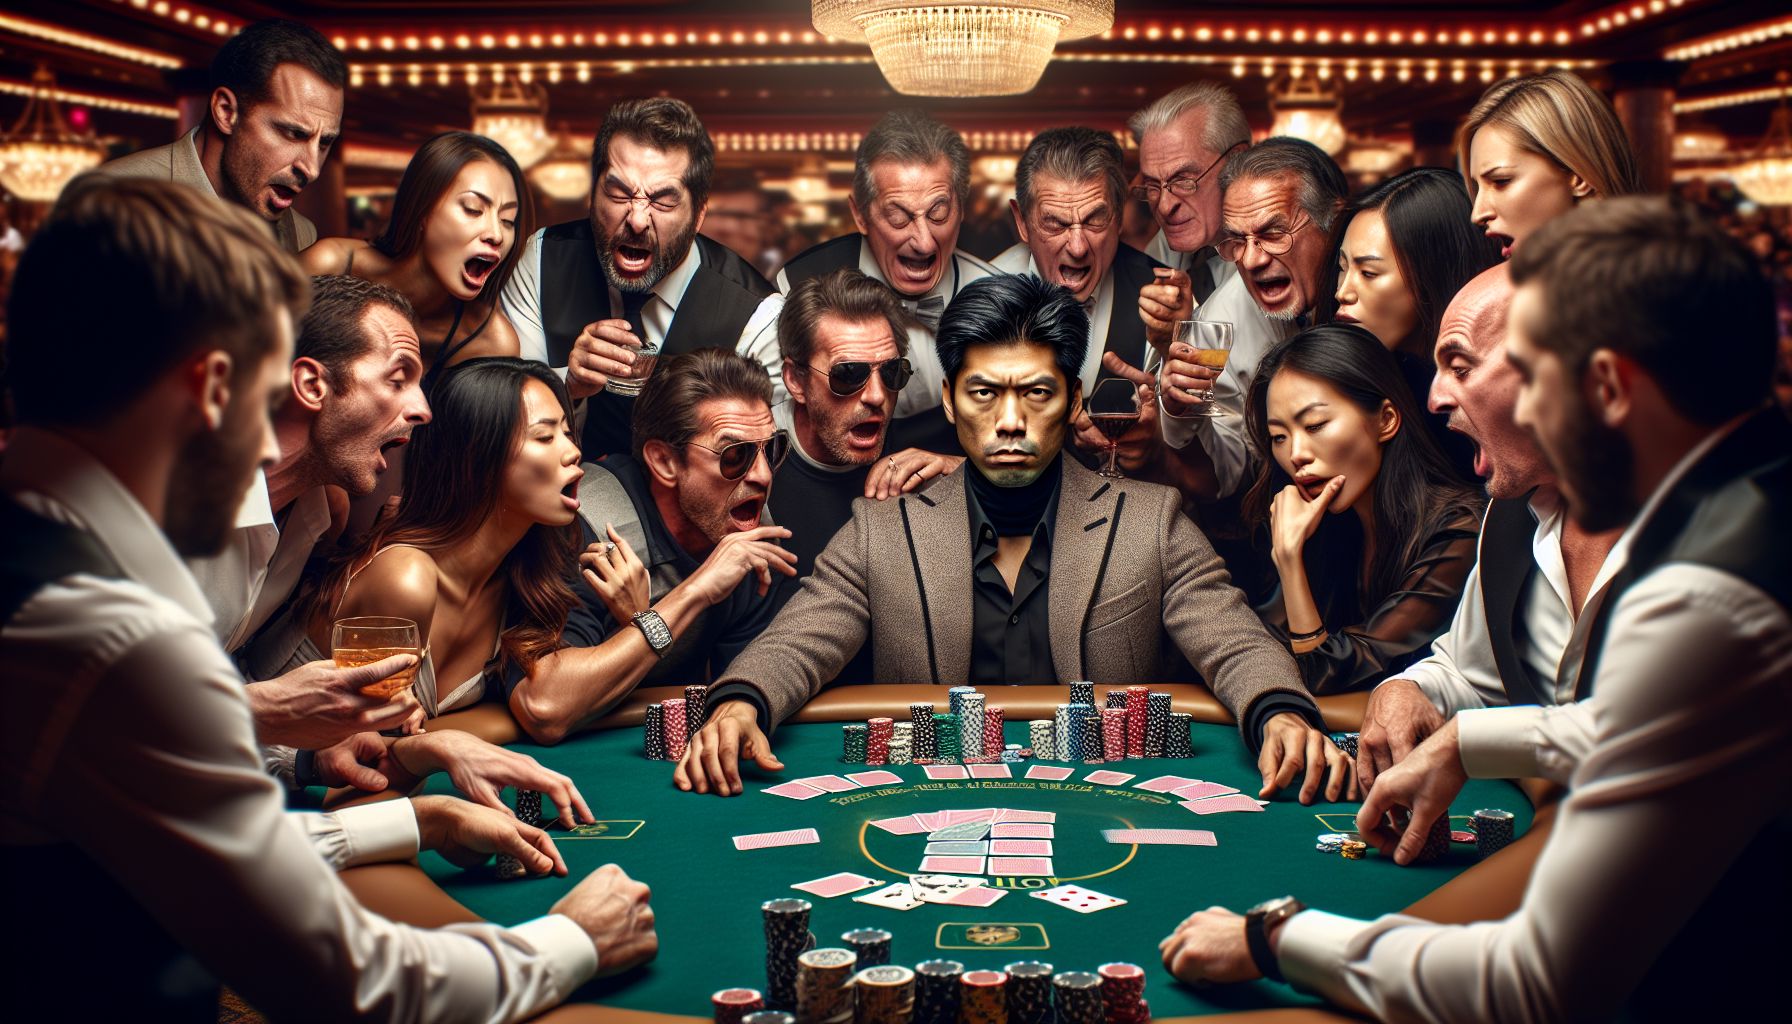 Poker Face: The Power of Nonverbal Skills at the Casino